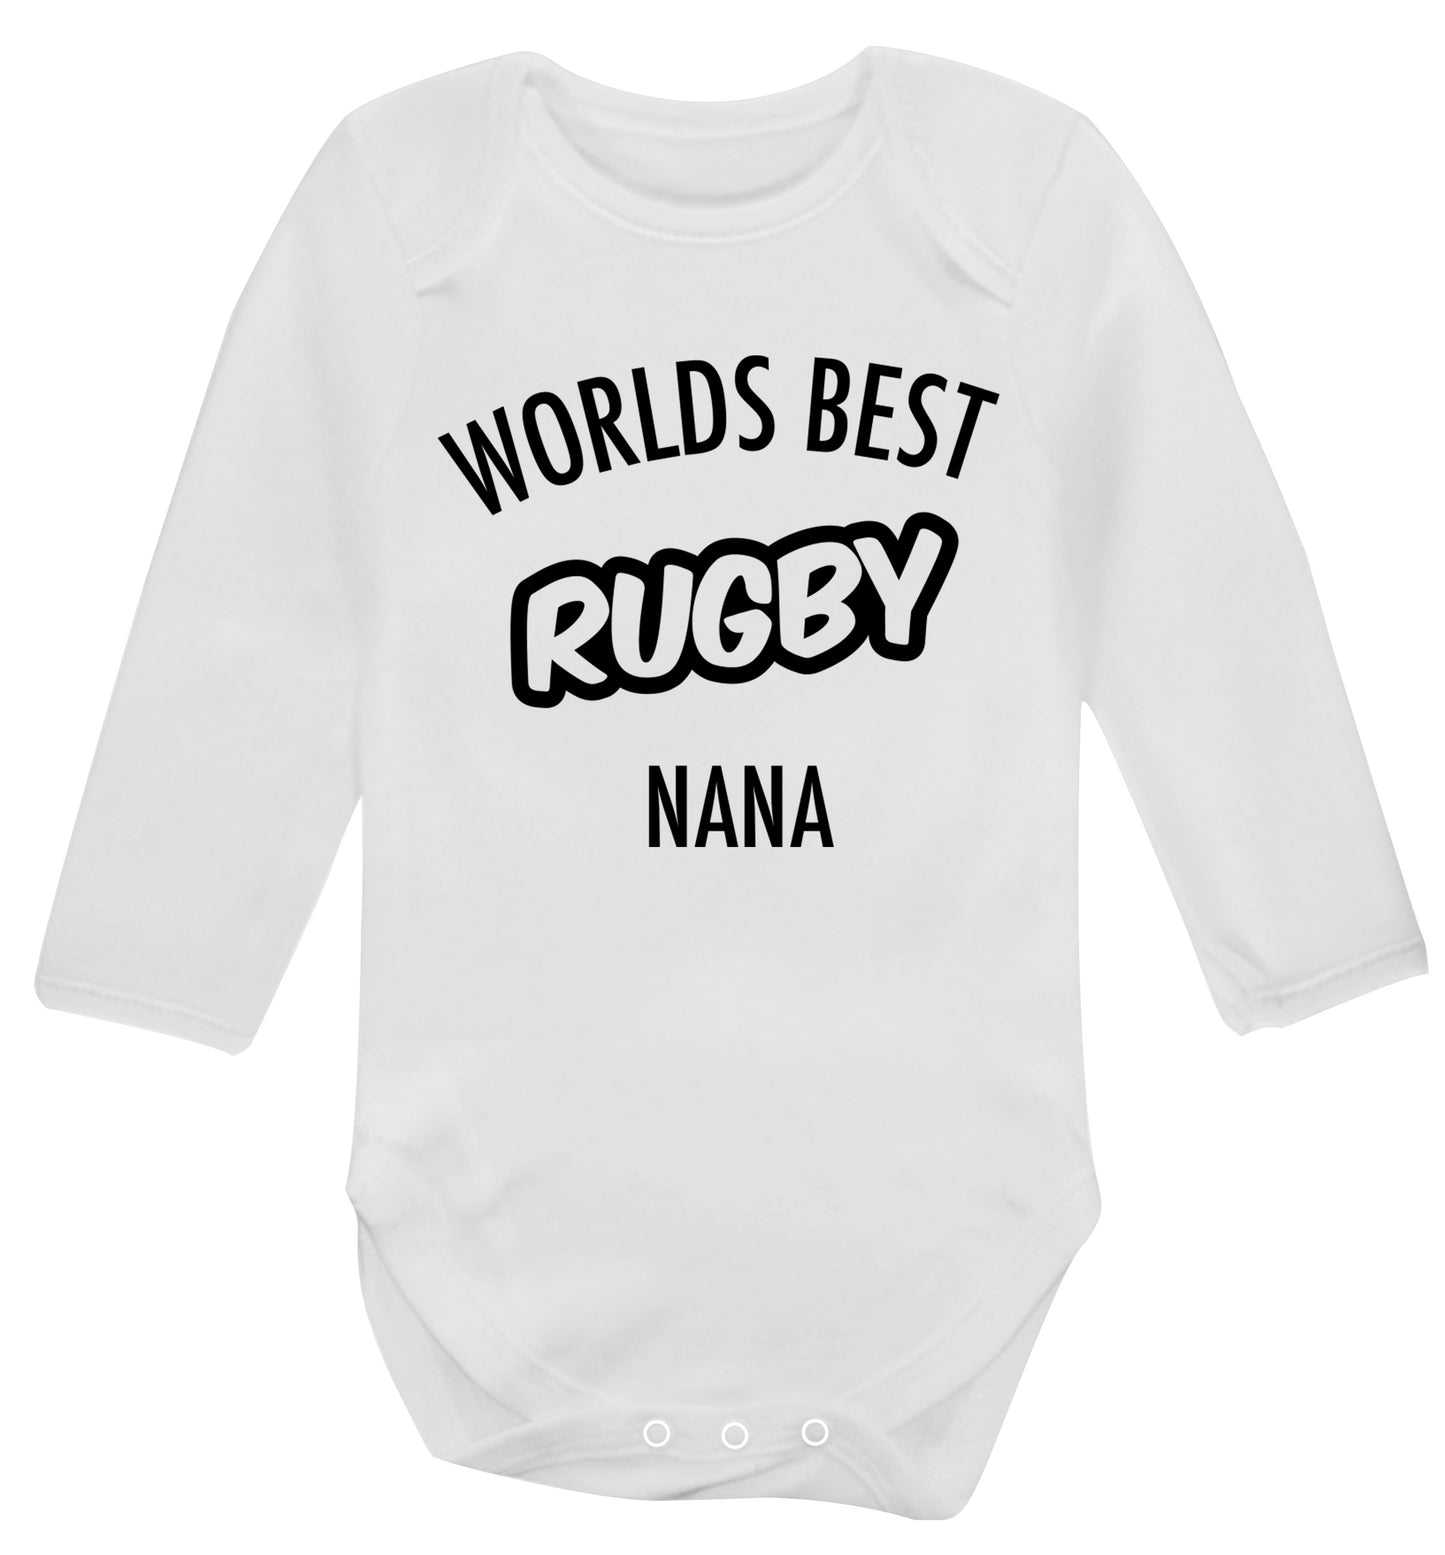 Worlds Best Rugby Grandma Baby Vest long sleeved white 6-12 months